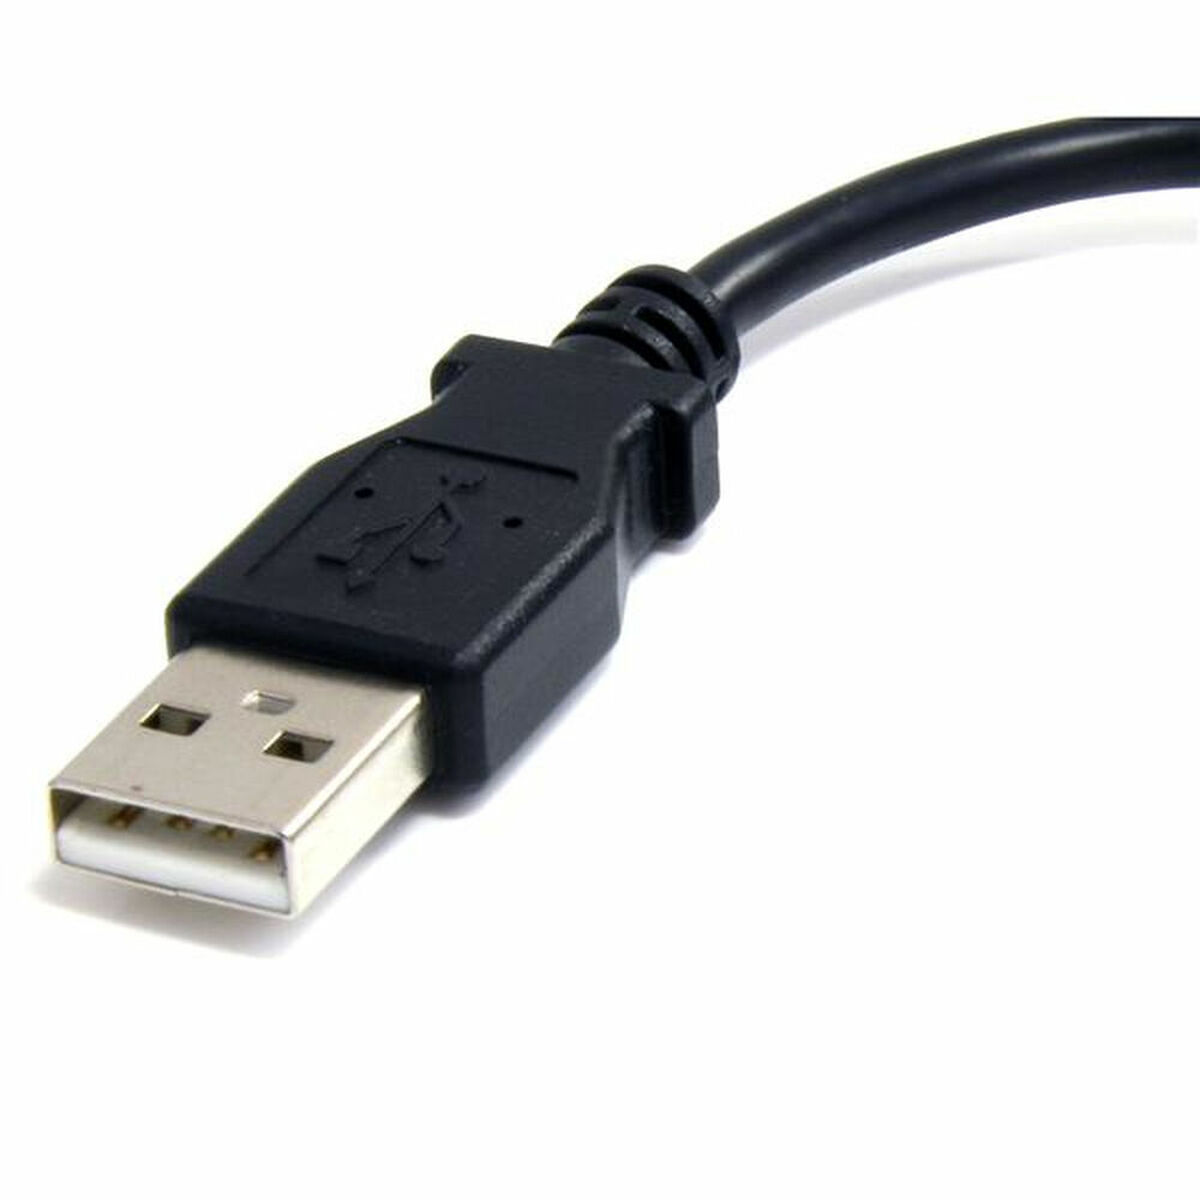 USB Cable to Micro USB Startech UUSBHAUB6IN          Black